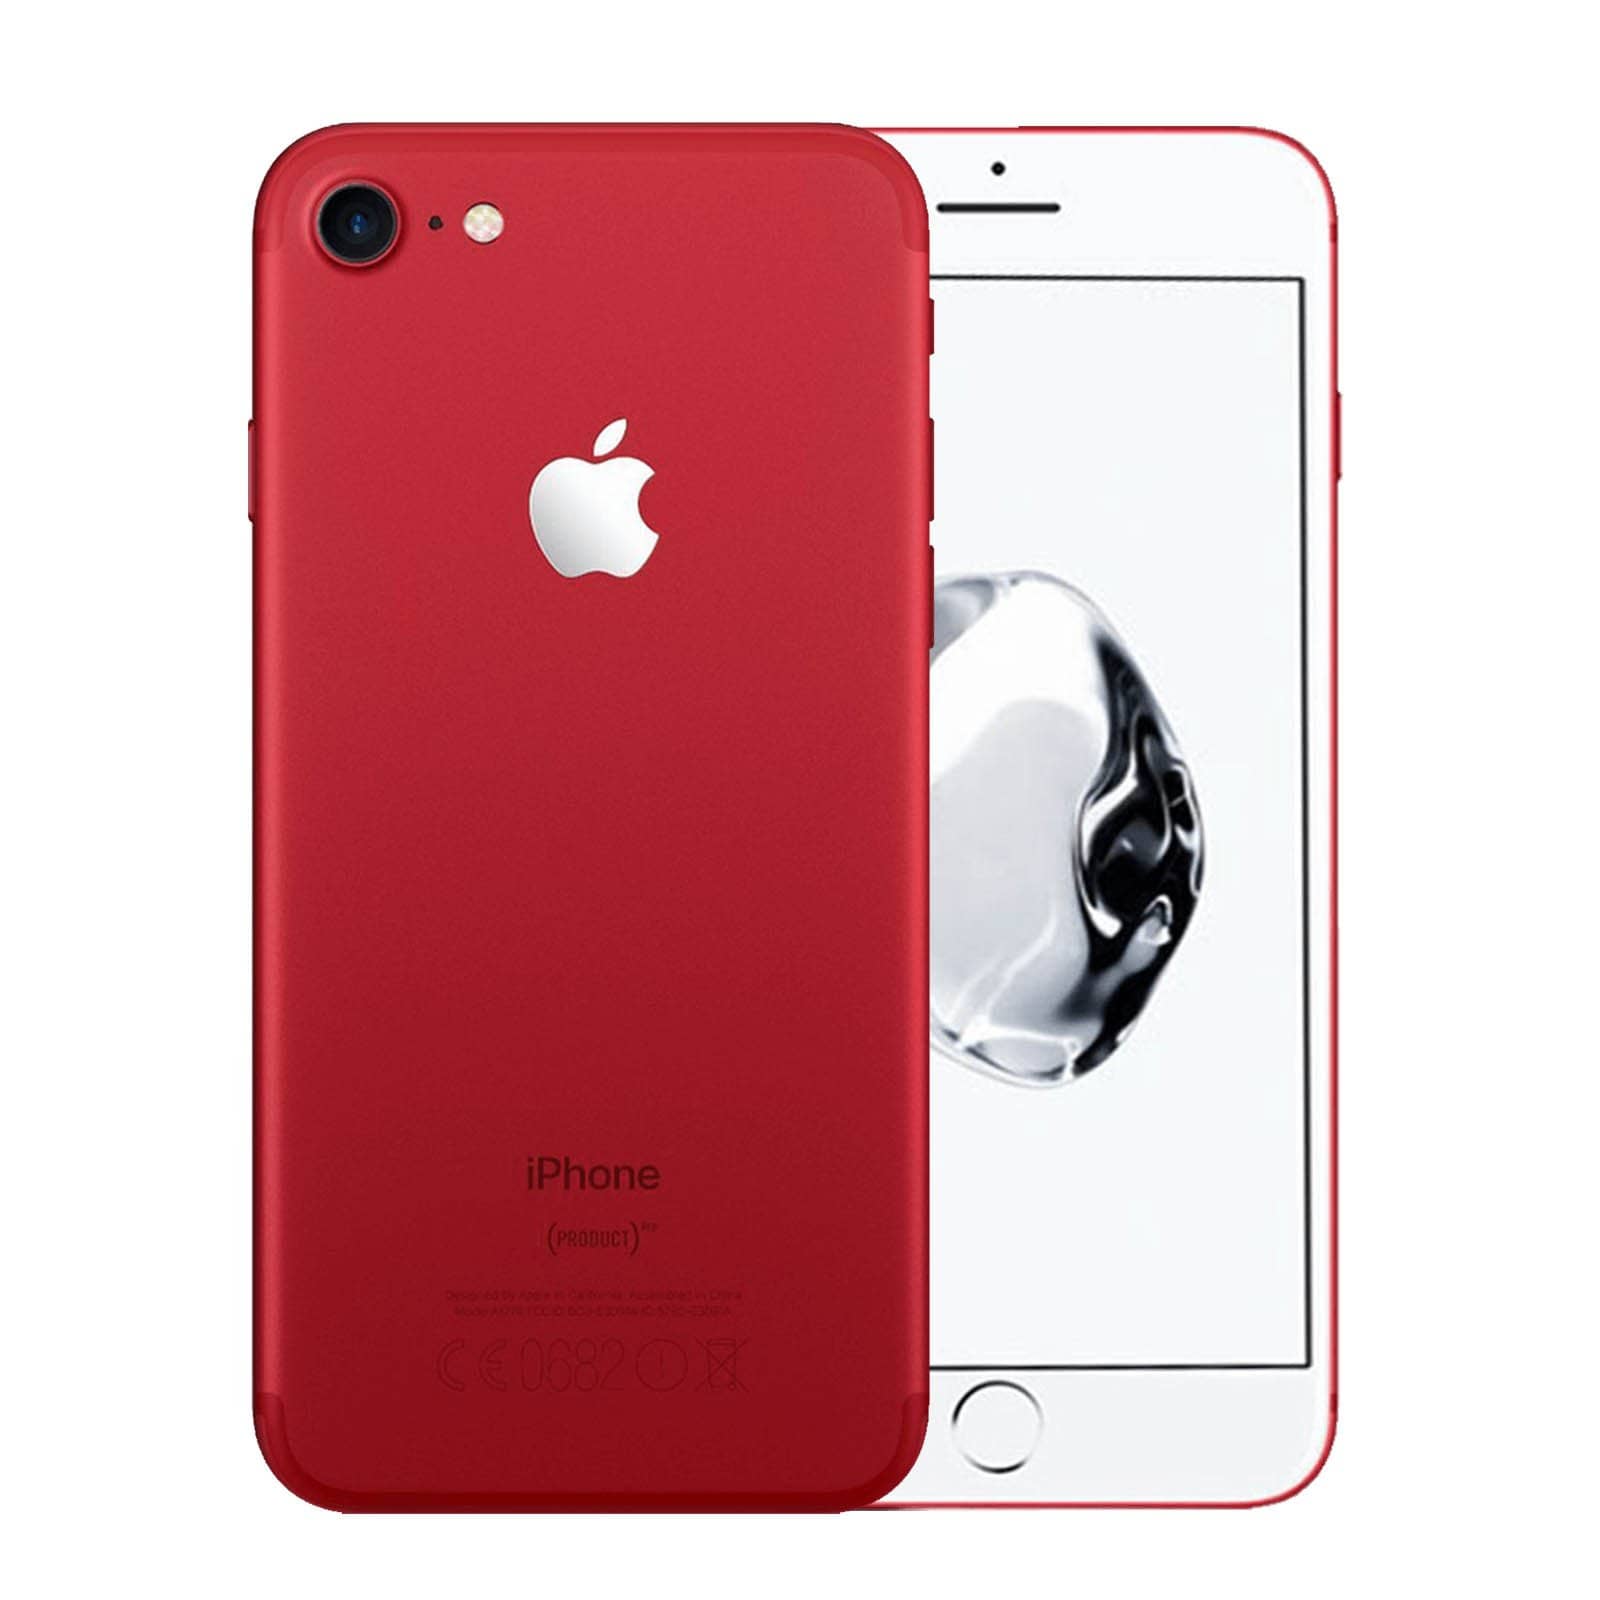 Apple iPhone 7 128GB Product Red Very Good - Unlocked